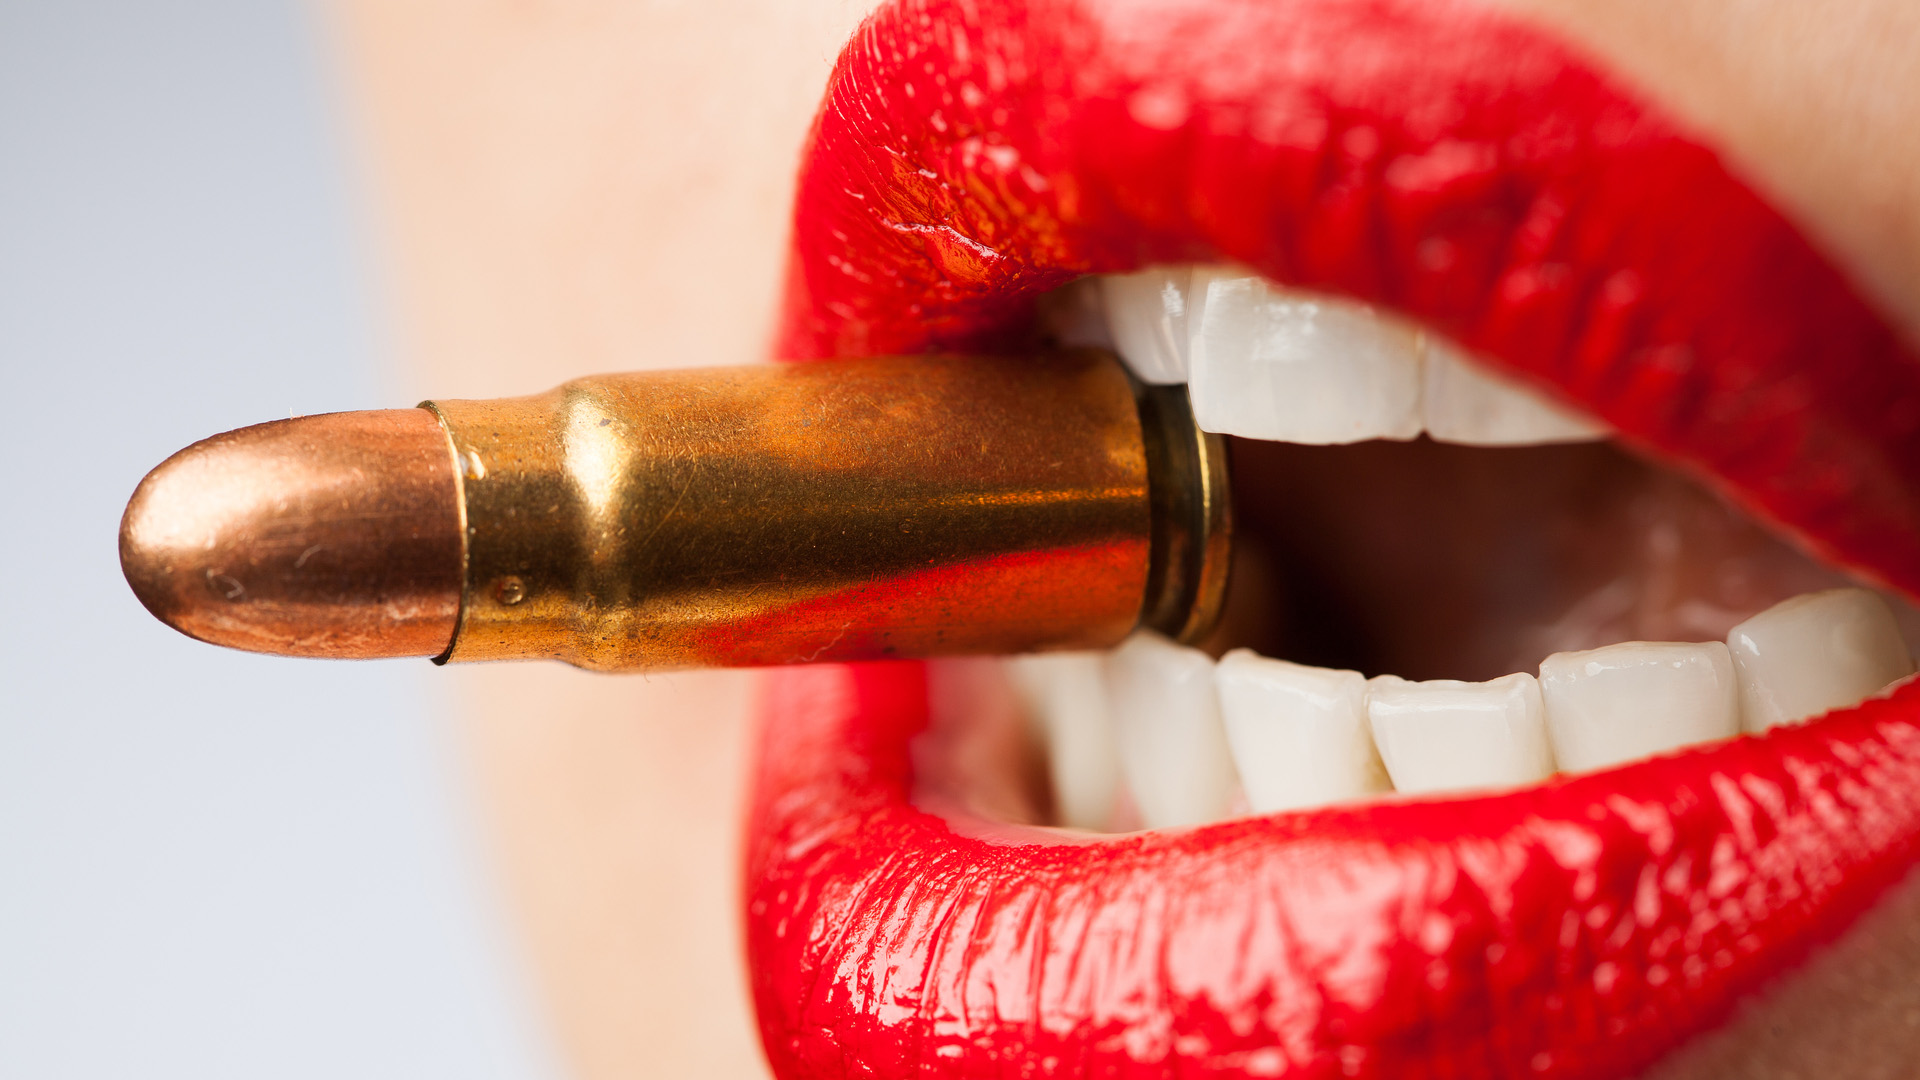 Mouth of a woman, parted red lips biting down on a golden bullet.